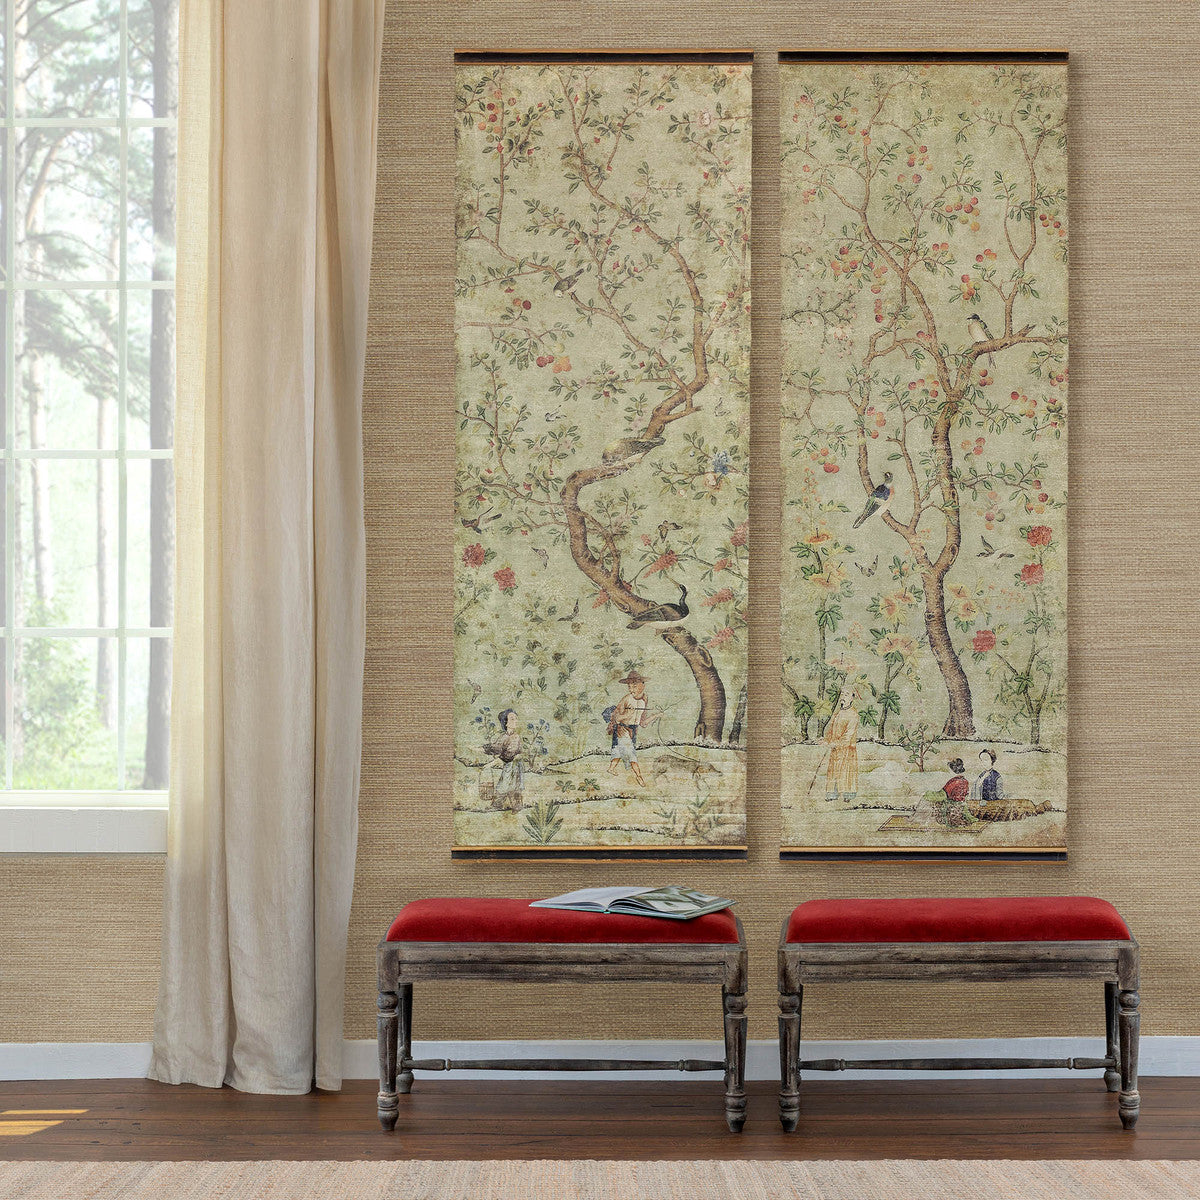 Chinoiserie Pattern Wall Hanging Pair